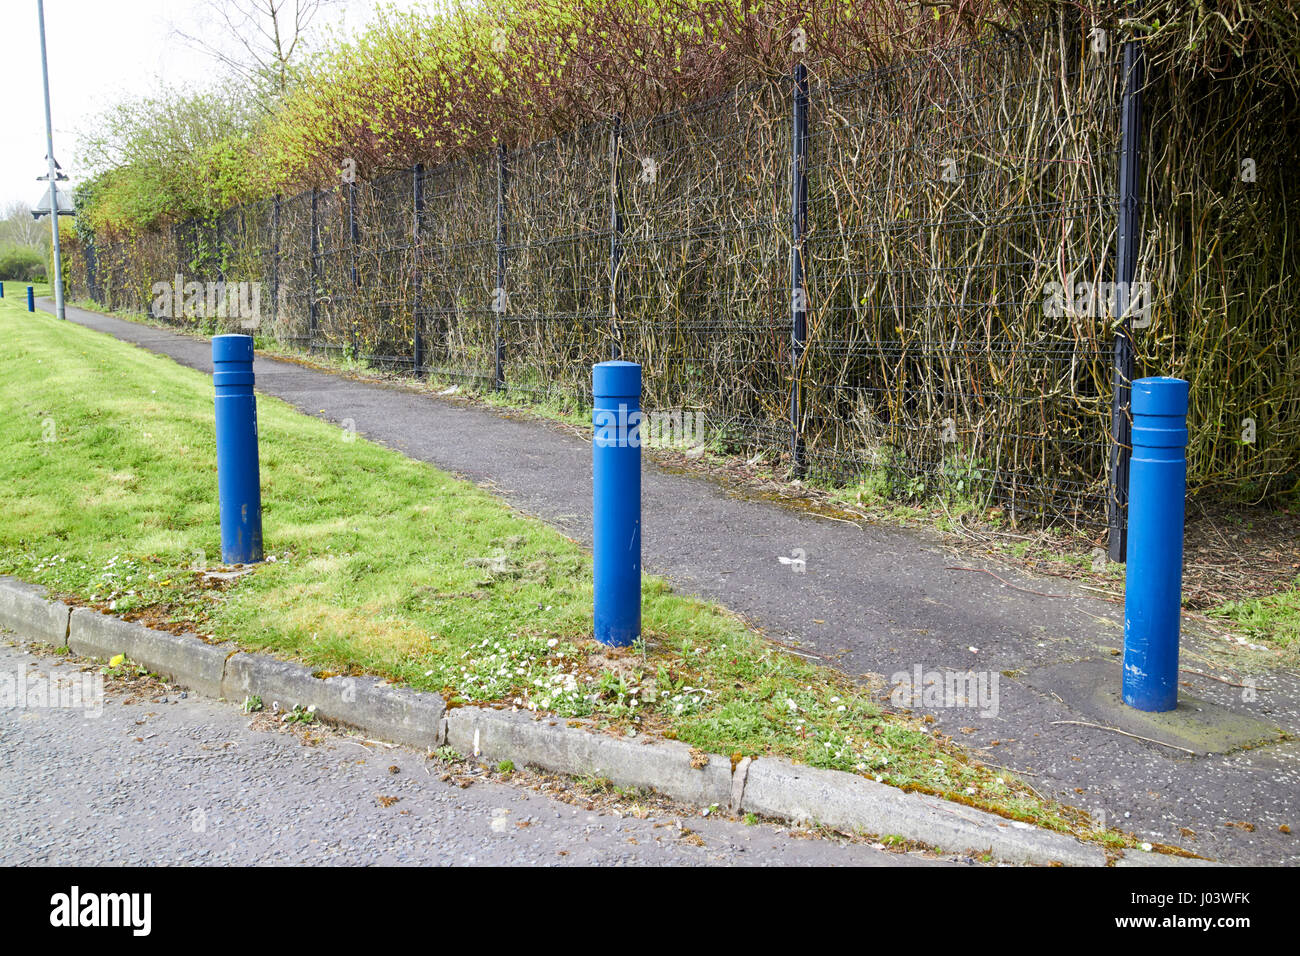 security bollards and grass earth berm protecting footpath in secure commercial area Newtownabbey UK these installations were common designs in the tr Stock Photo